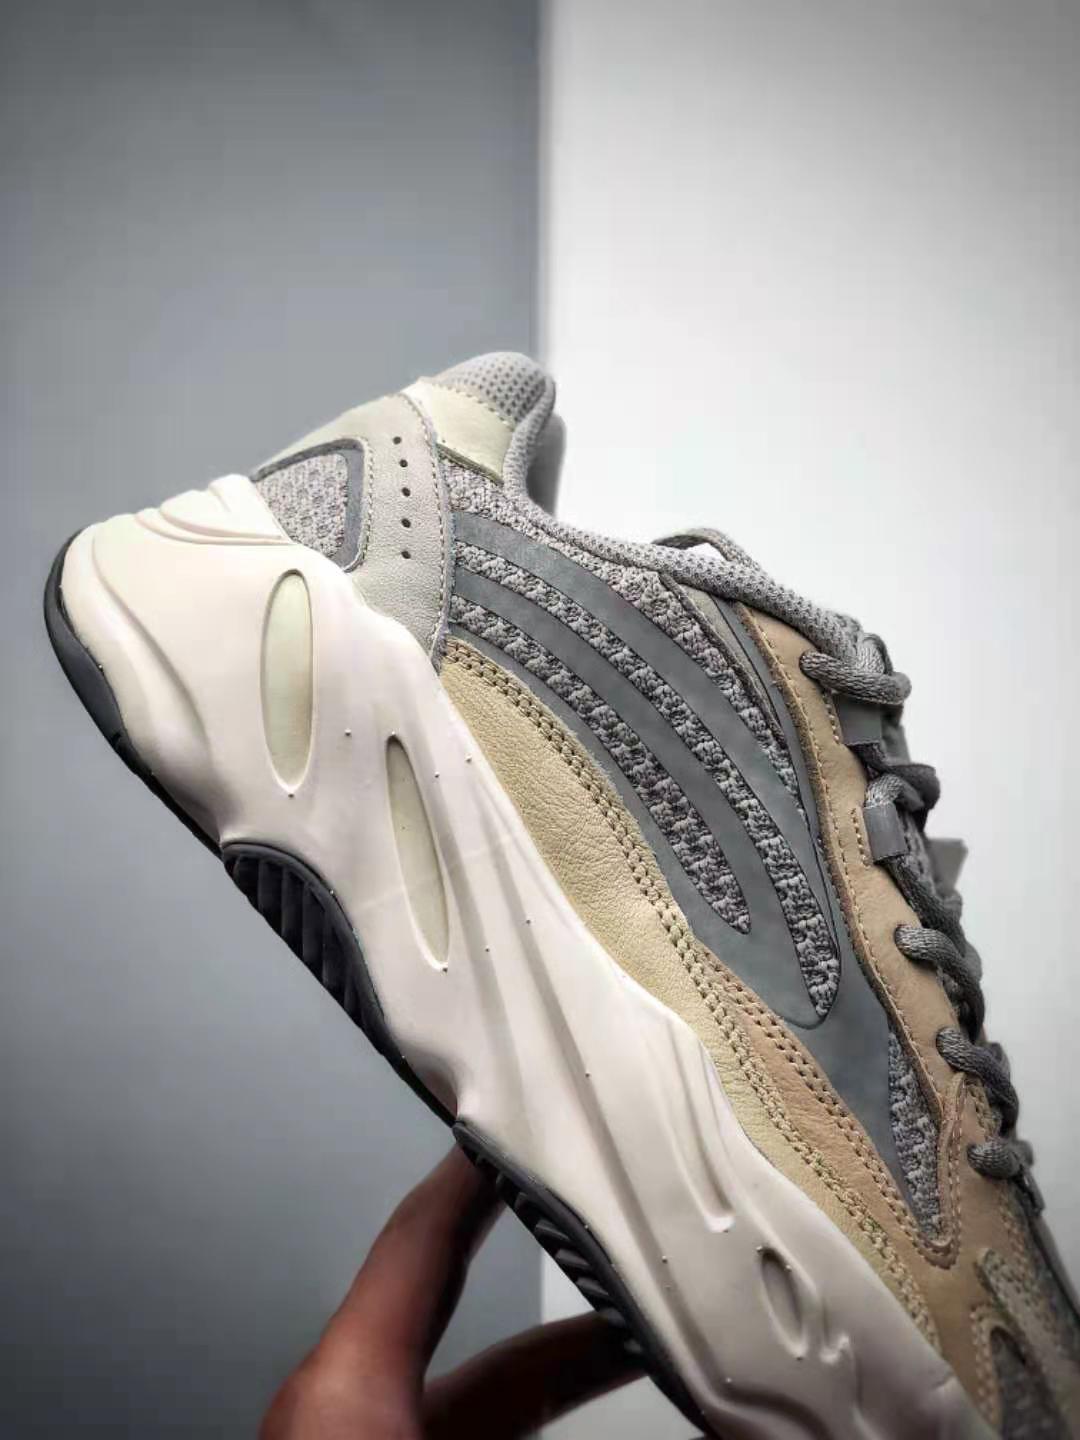 Adidas Yeezy Boost 700 V2 'Cream' GY7924 - Shop the Latest Release Online